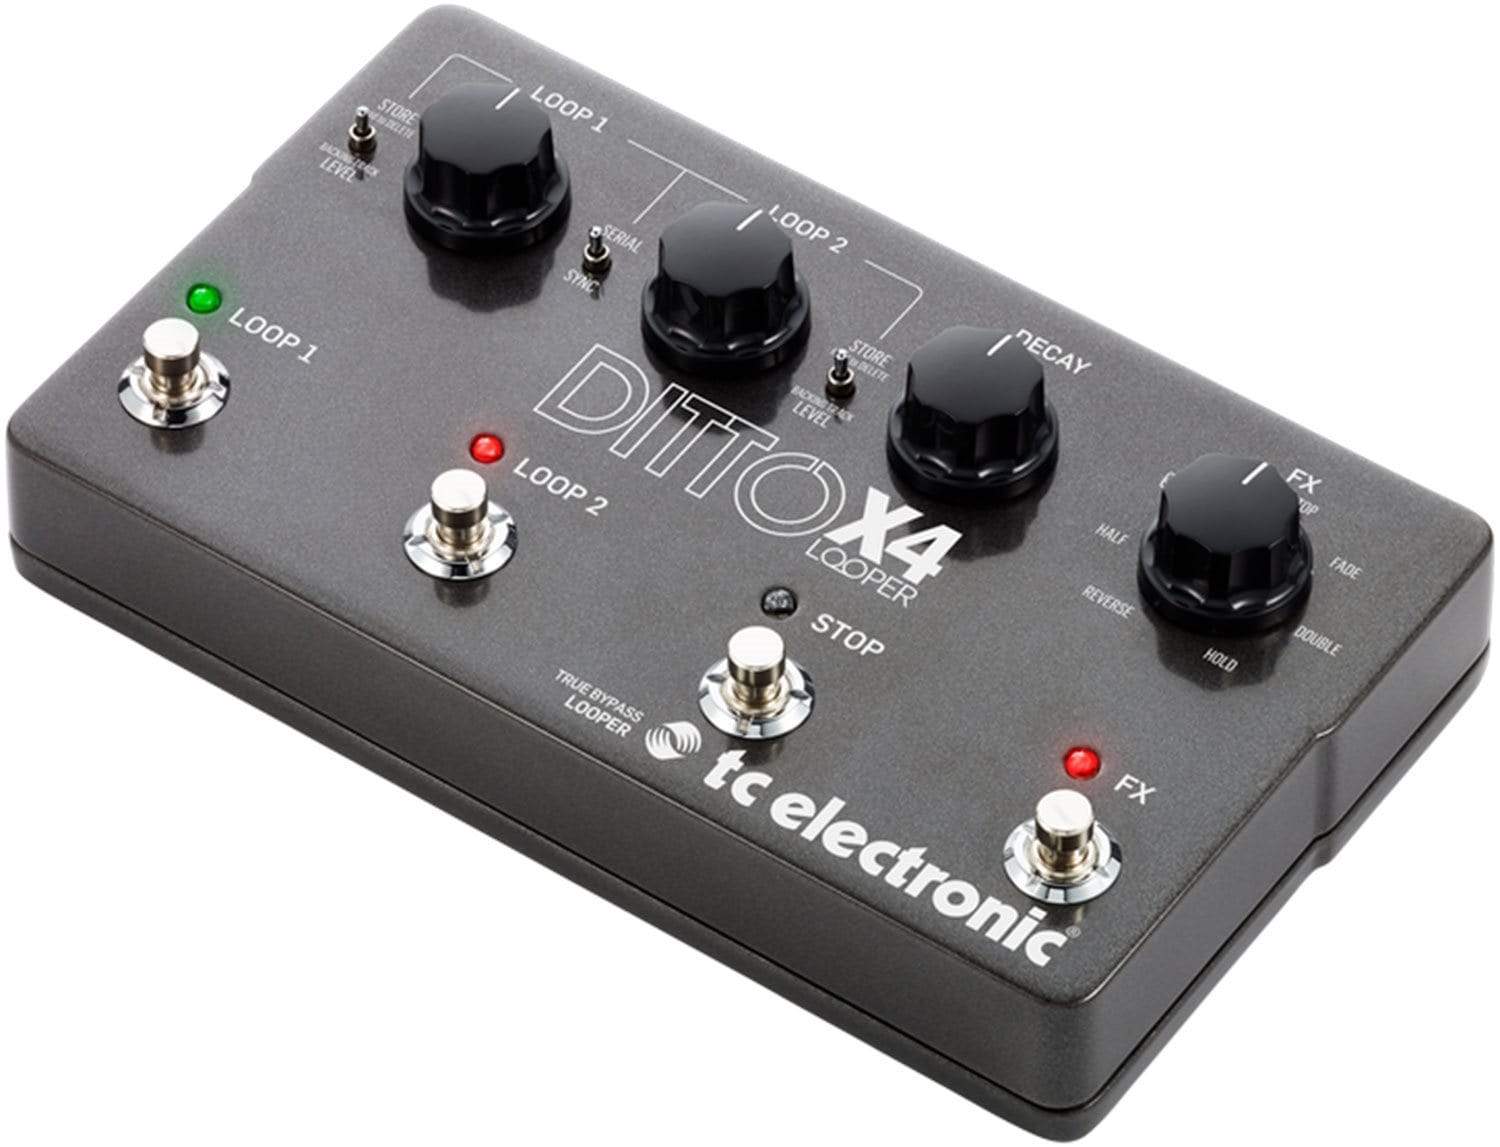 TC Electronic Ditto X4 Looper Intuitive Dual Guitar Pedal - ProSound and Stage Lighting